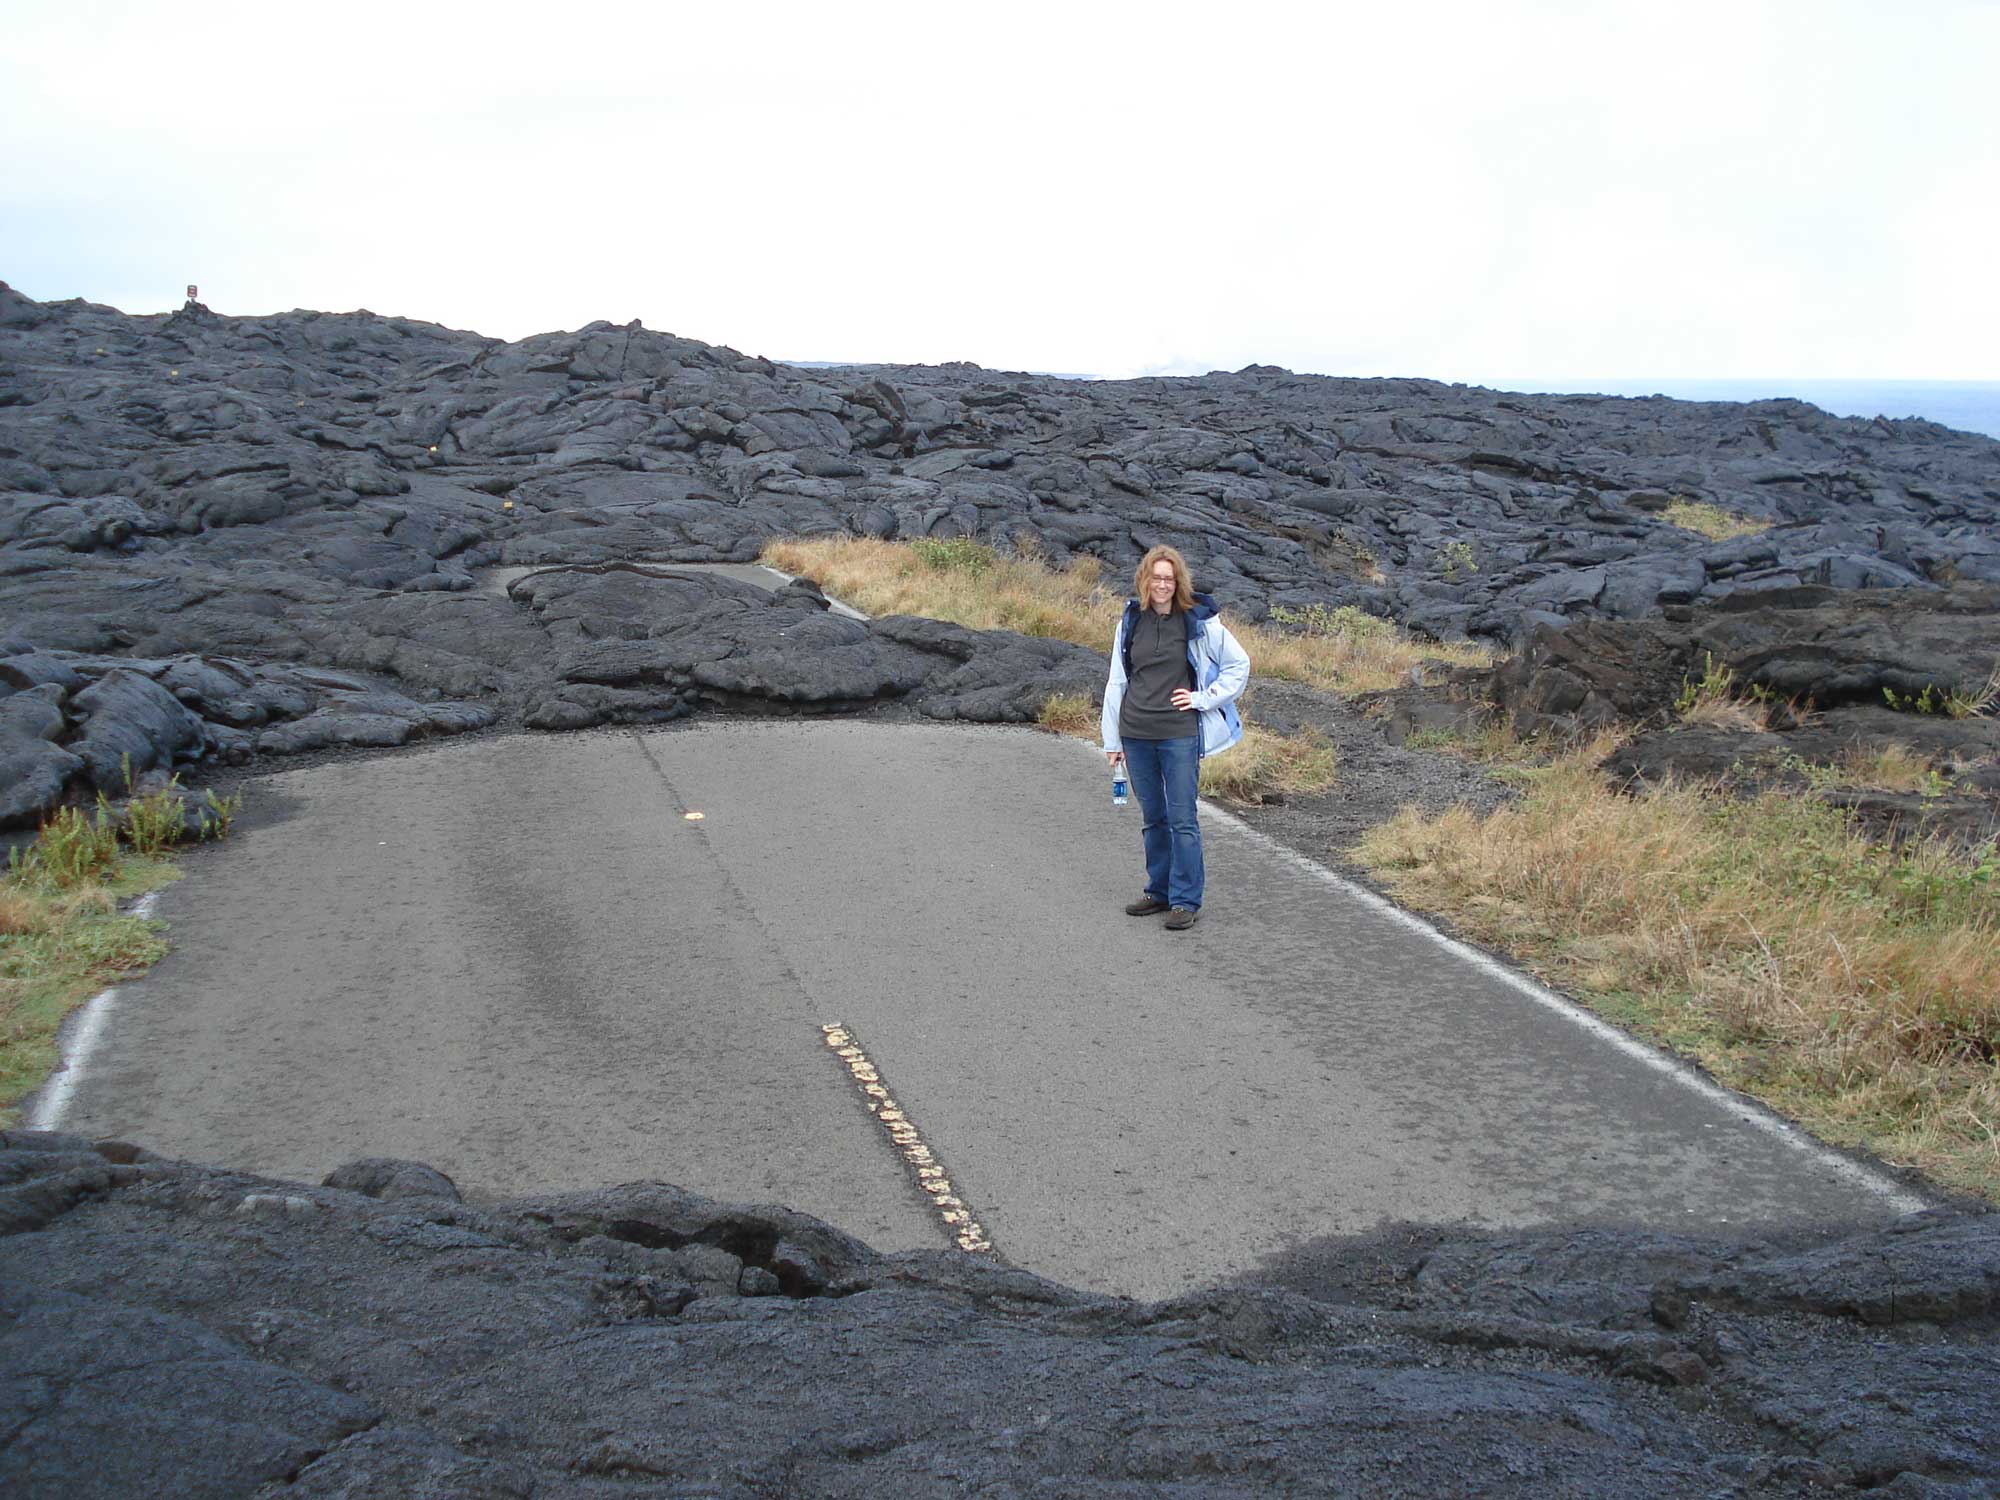 Photograph of a woman standing on a road on Hawaii Island that has been partially covered by lava.